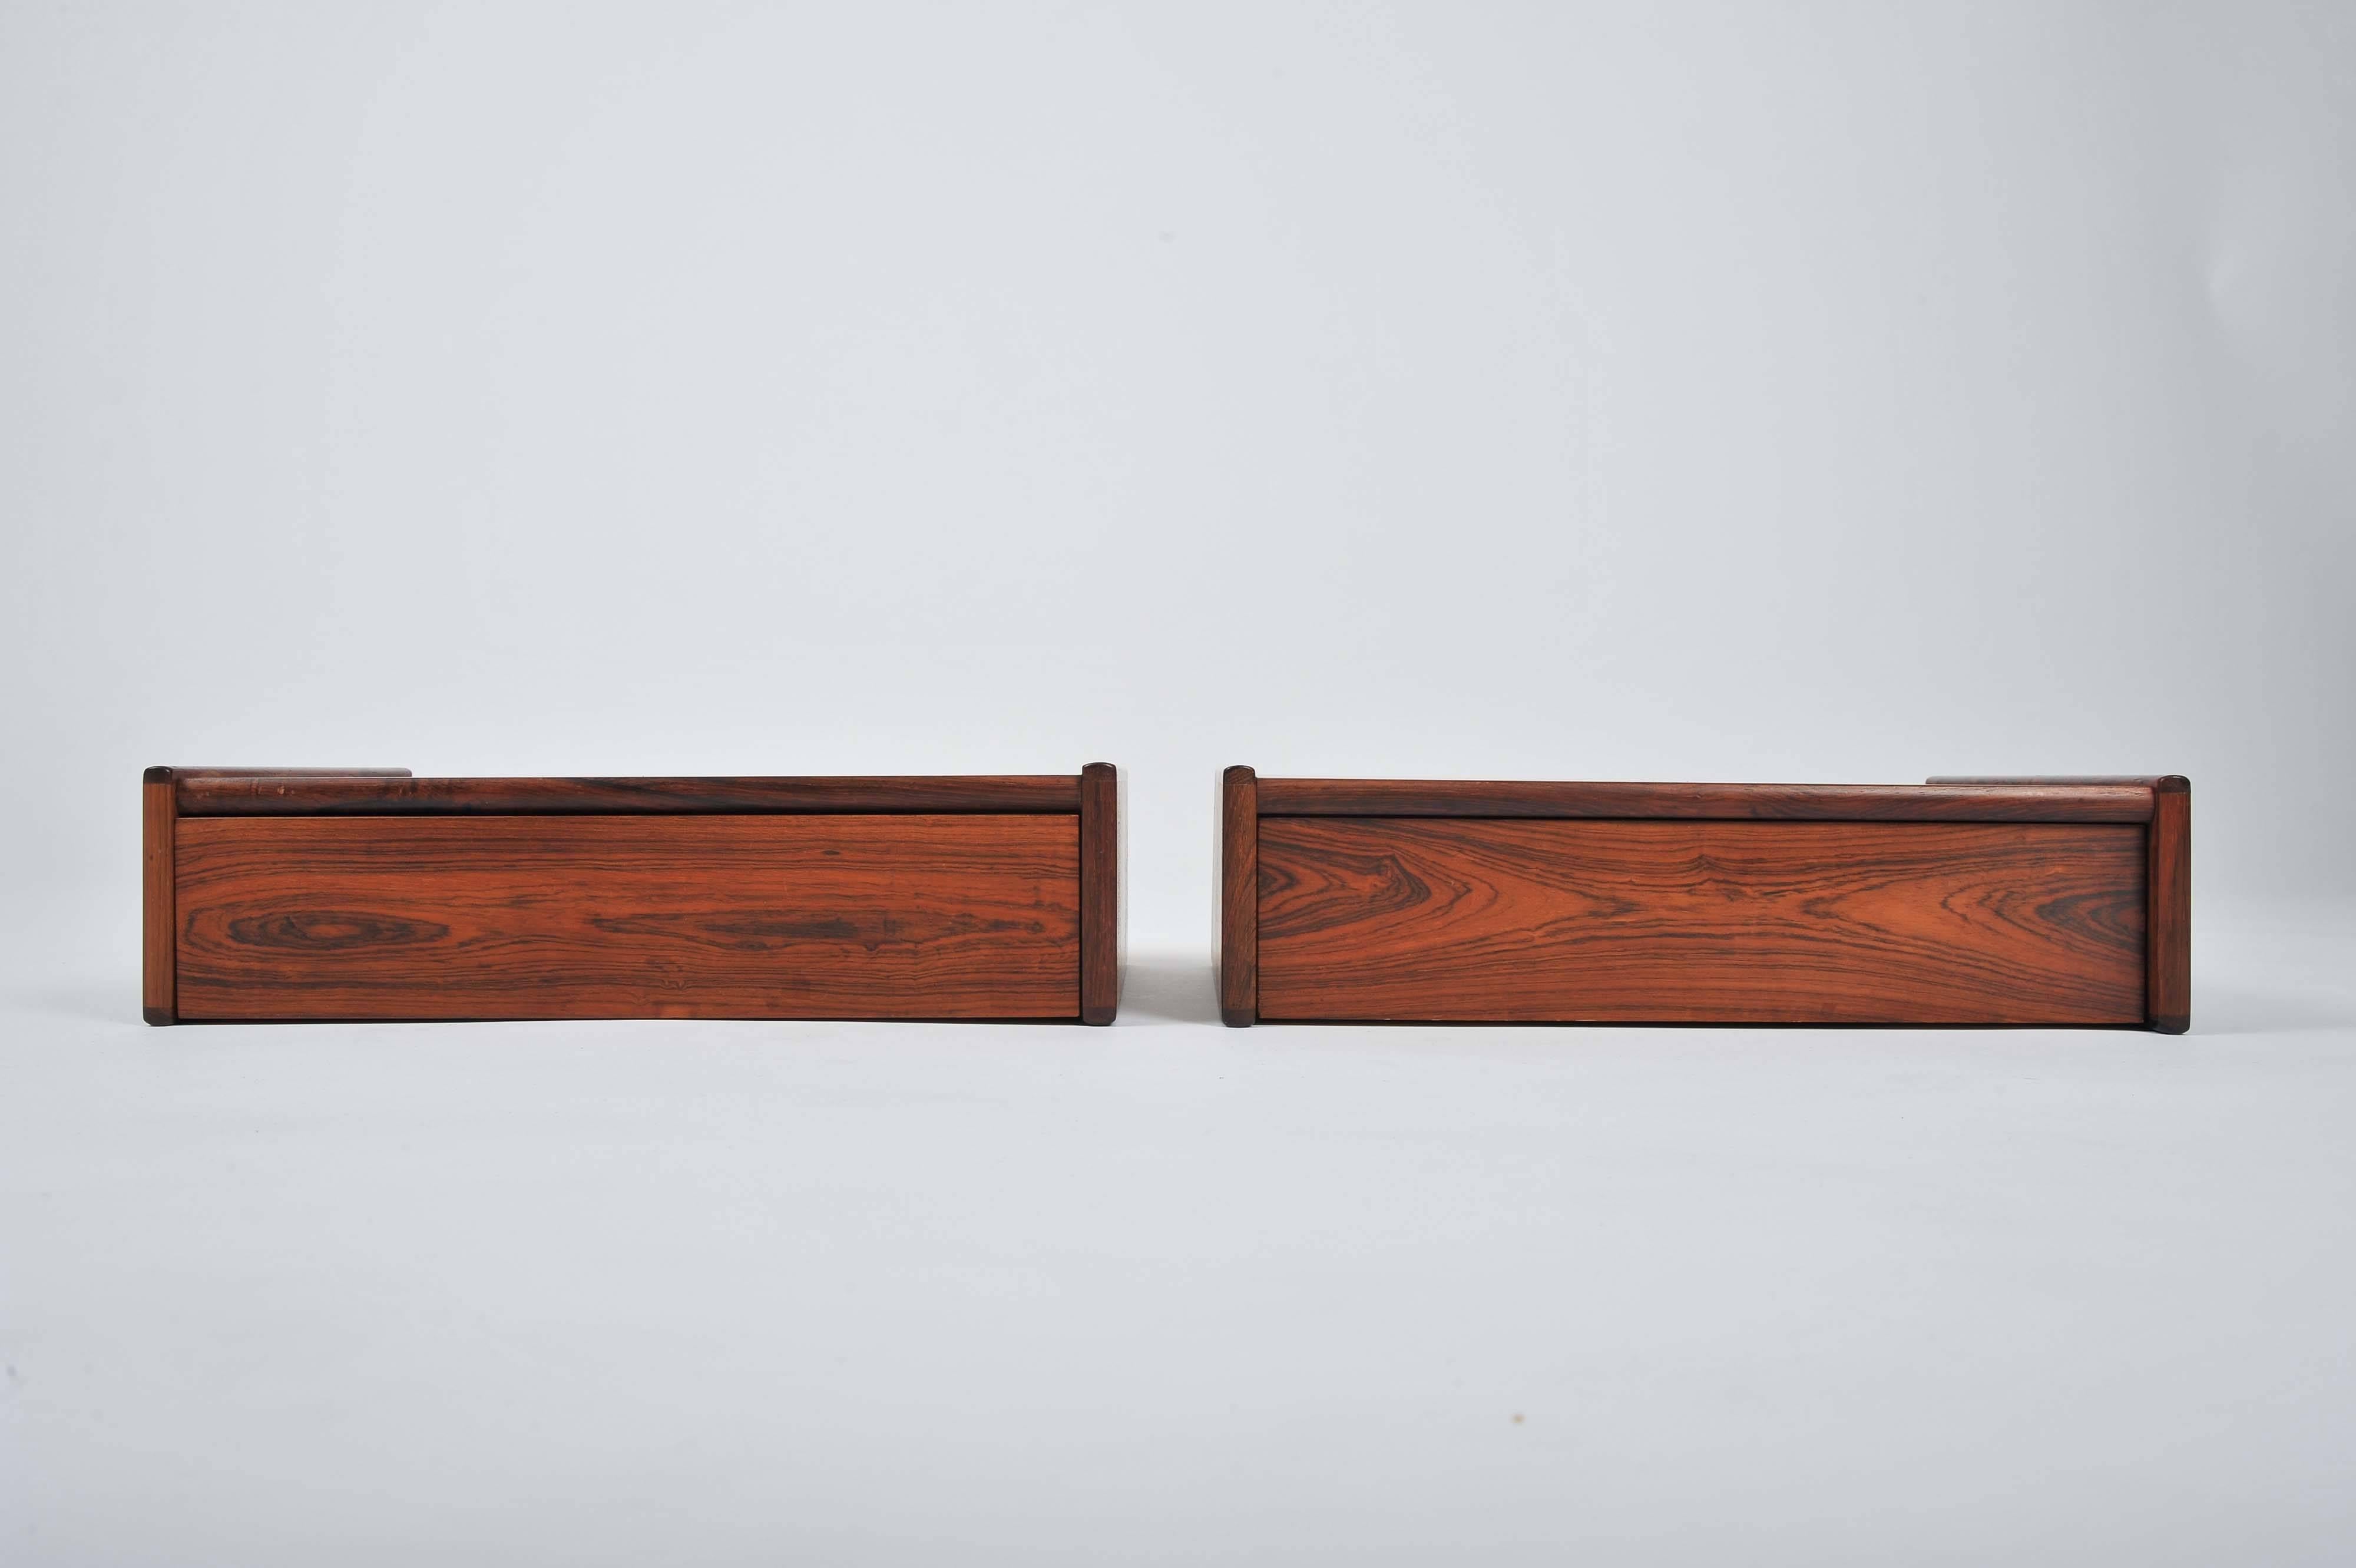 Pair of floating cabinets, Danish, circa 1965.

Consoles, shelves or bedside cabinets.